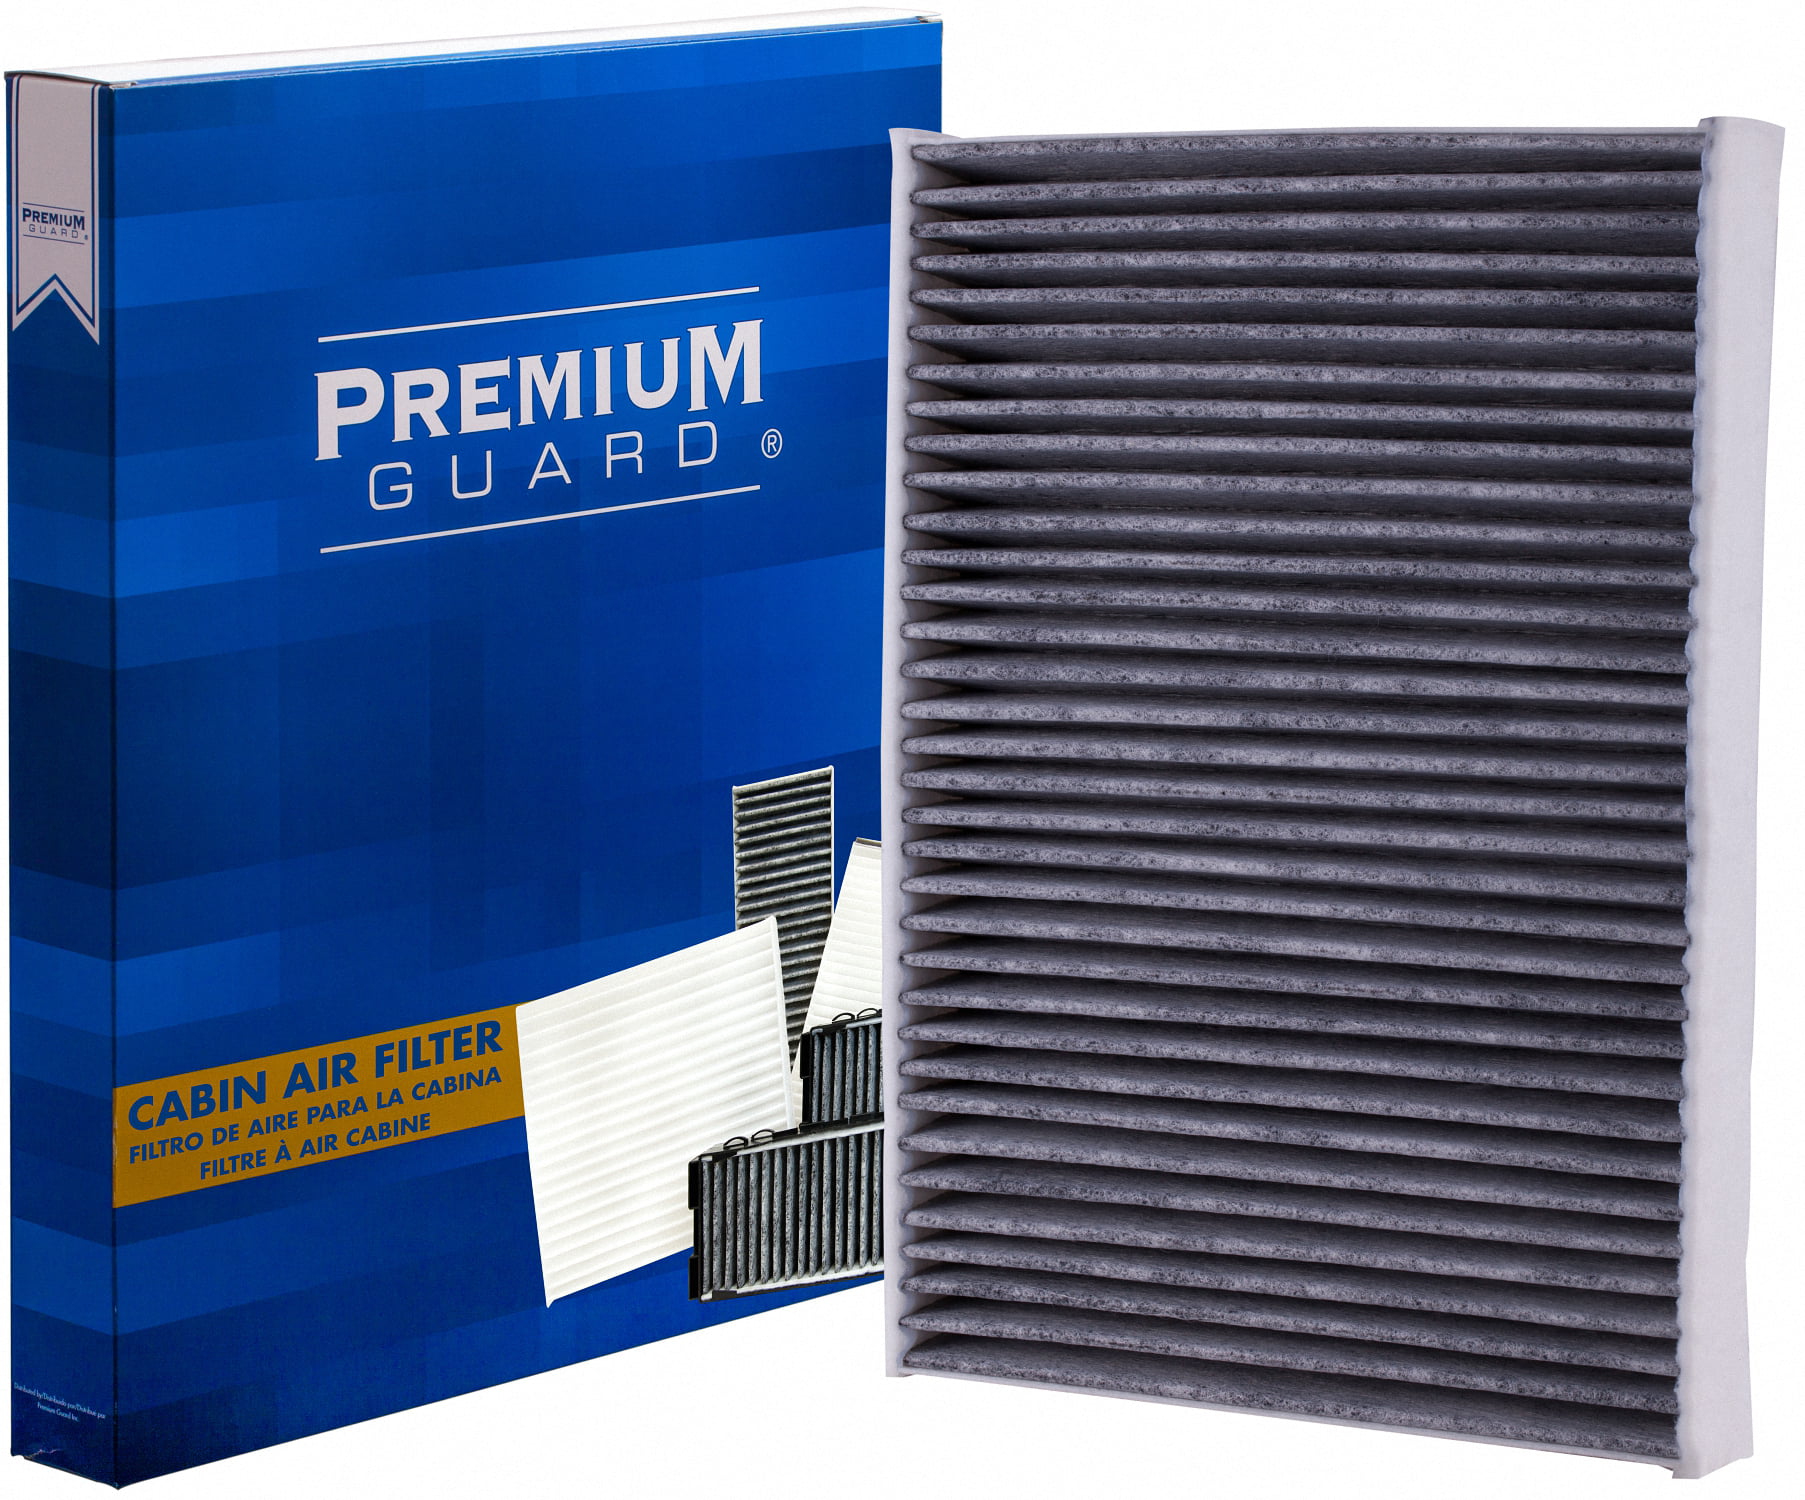 PG Cabin Air Filter PC99334C | Fits 2017-18 Audi A4 allroad, 2017-18 A4 Quattro, 2018 A5 Quattro 2018 Audi Q7 Engine Air Filter Replacement